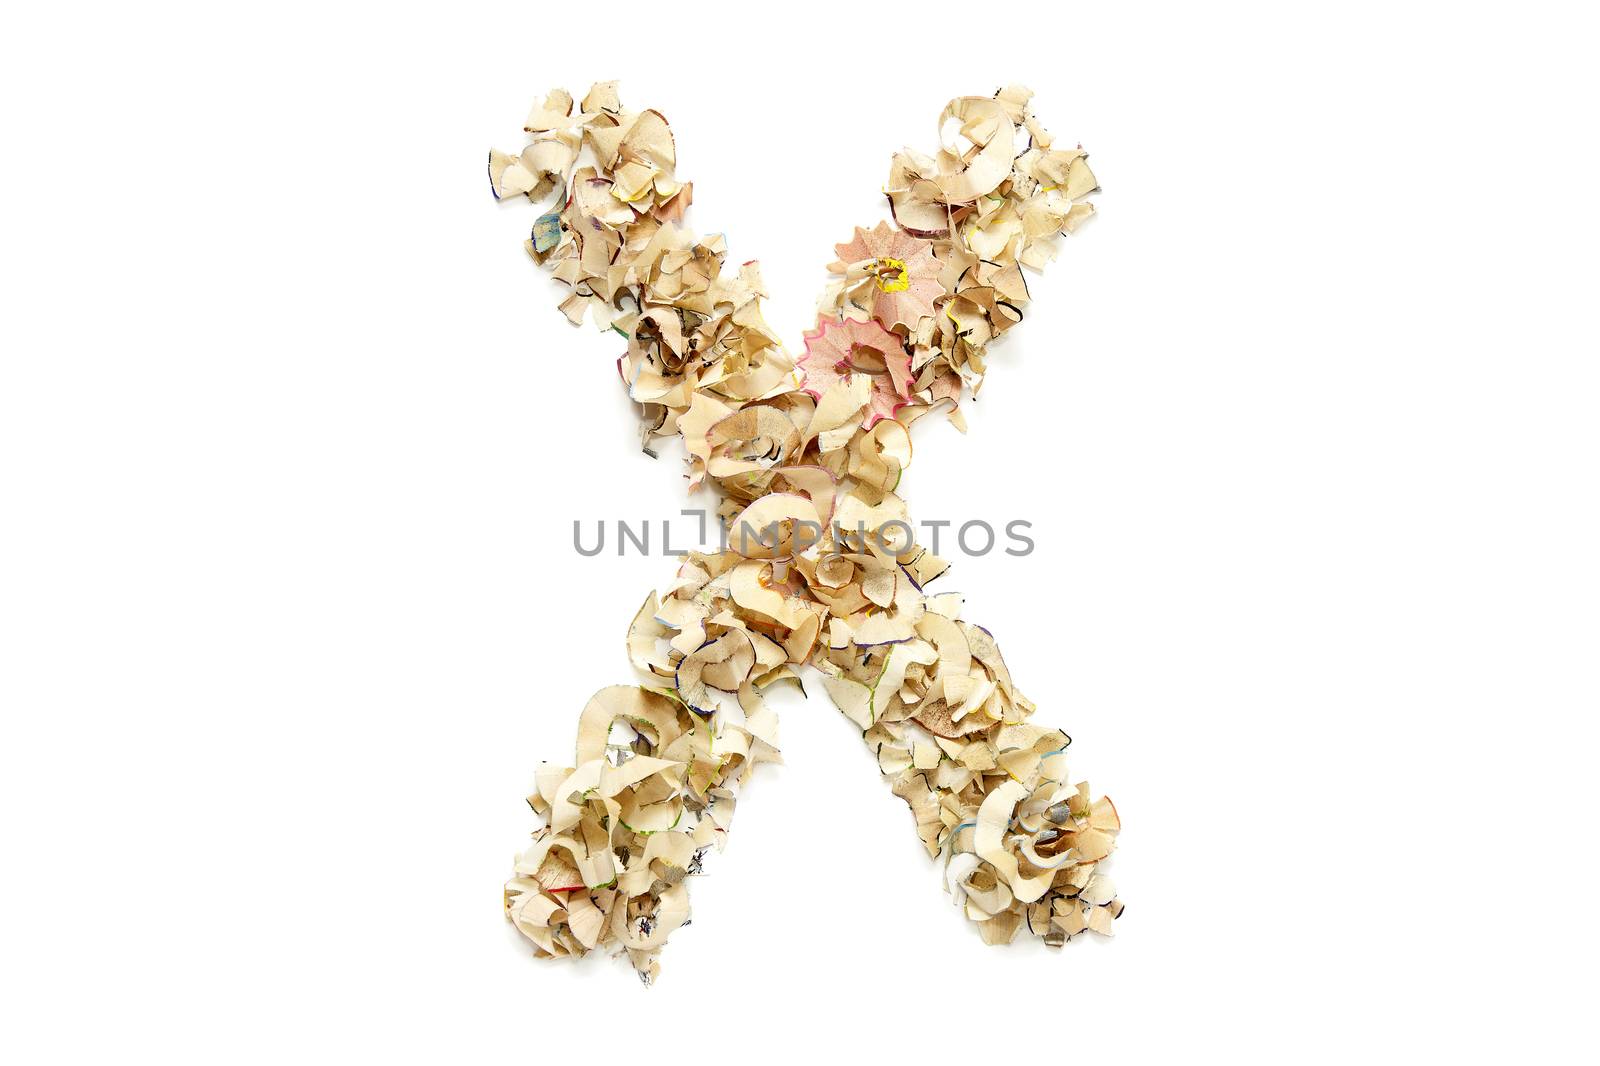 Letter X made from coloured pencil shavings for use in your design.